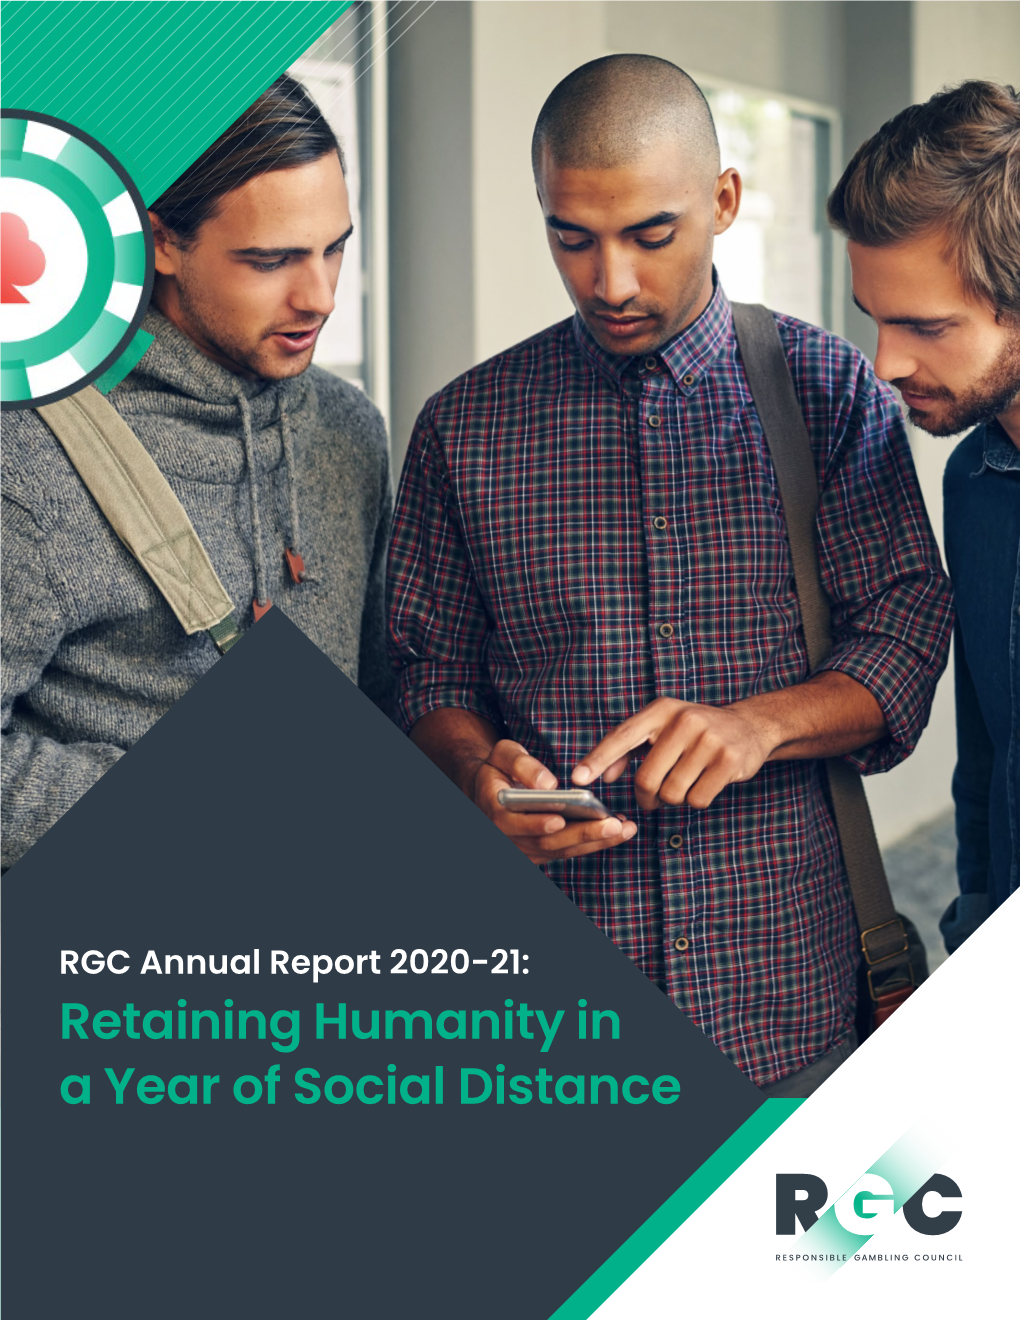 Retaining Humanity in a Year of Social Distance